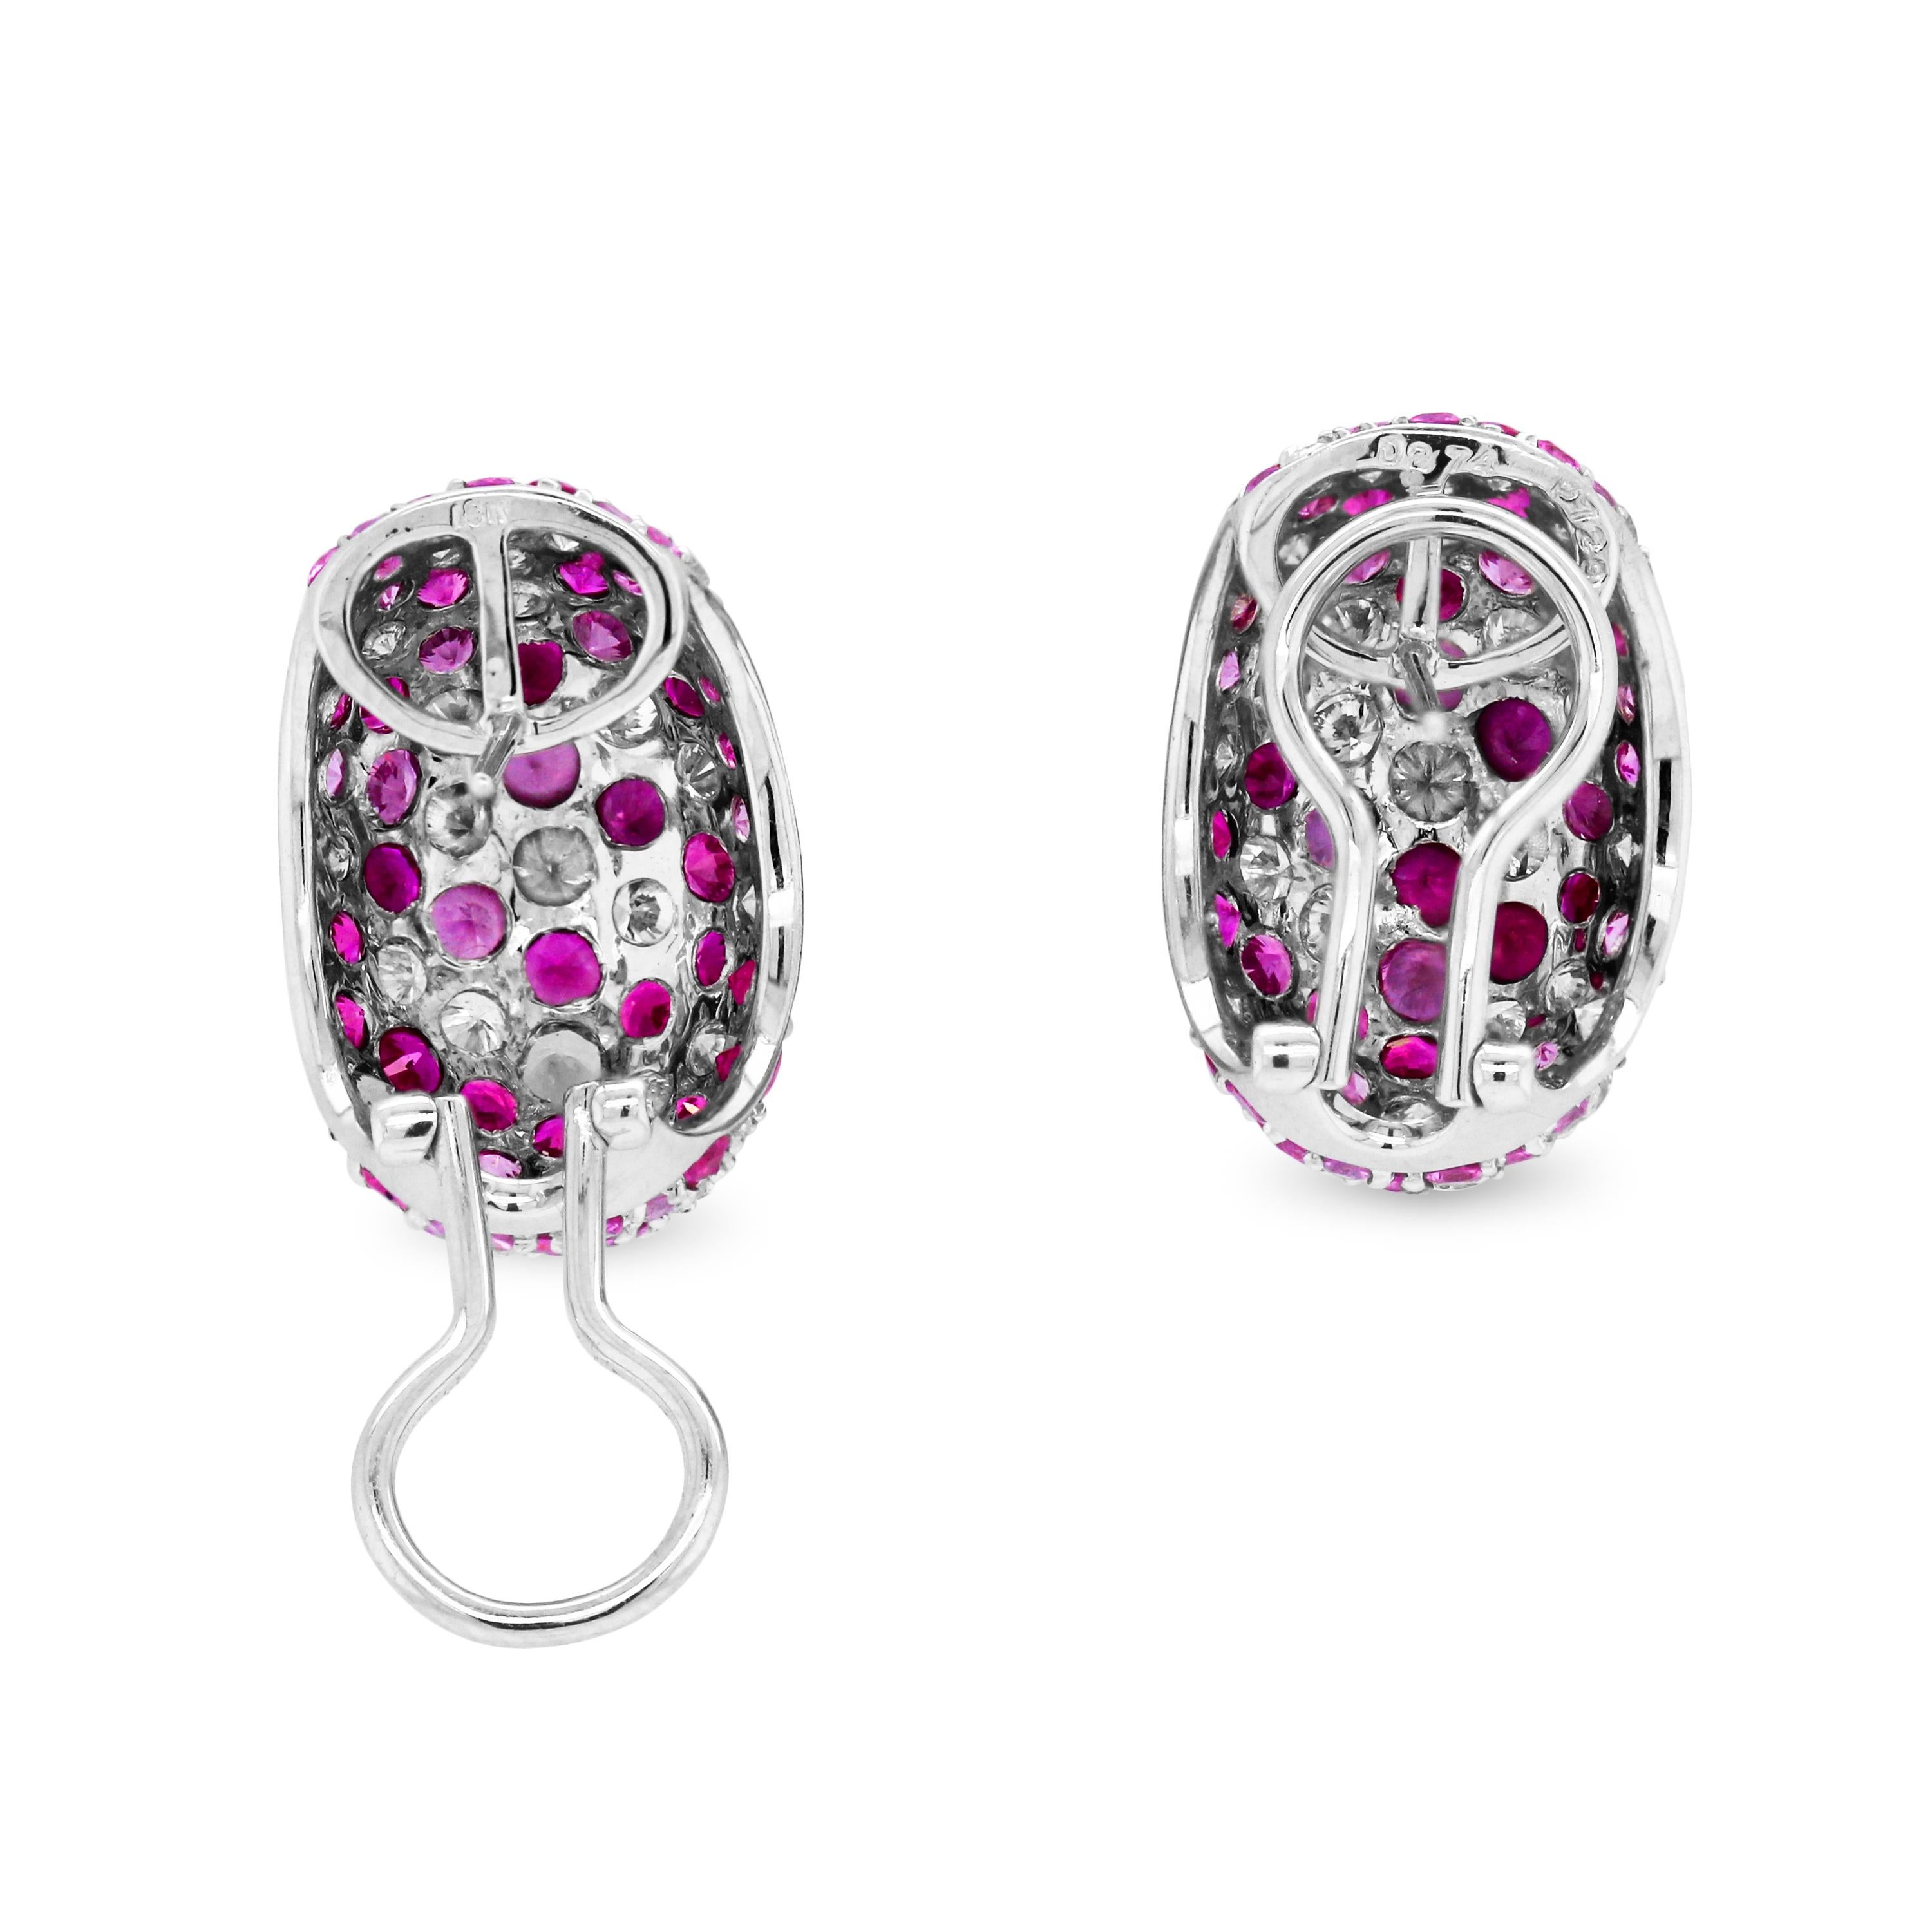 Shaded Pink Sapphires Diamonds 18K White Gold Earrings

A fun, everyday pair of earrings with light to dark pink sapphires set with a shading effect. Diamonds are also mixed in to bring this beauty to life. Made entirely in solid 18k gold.

Apprx.